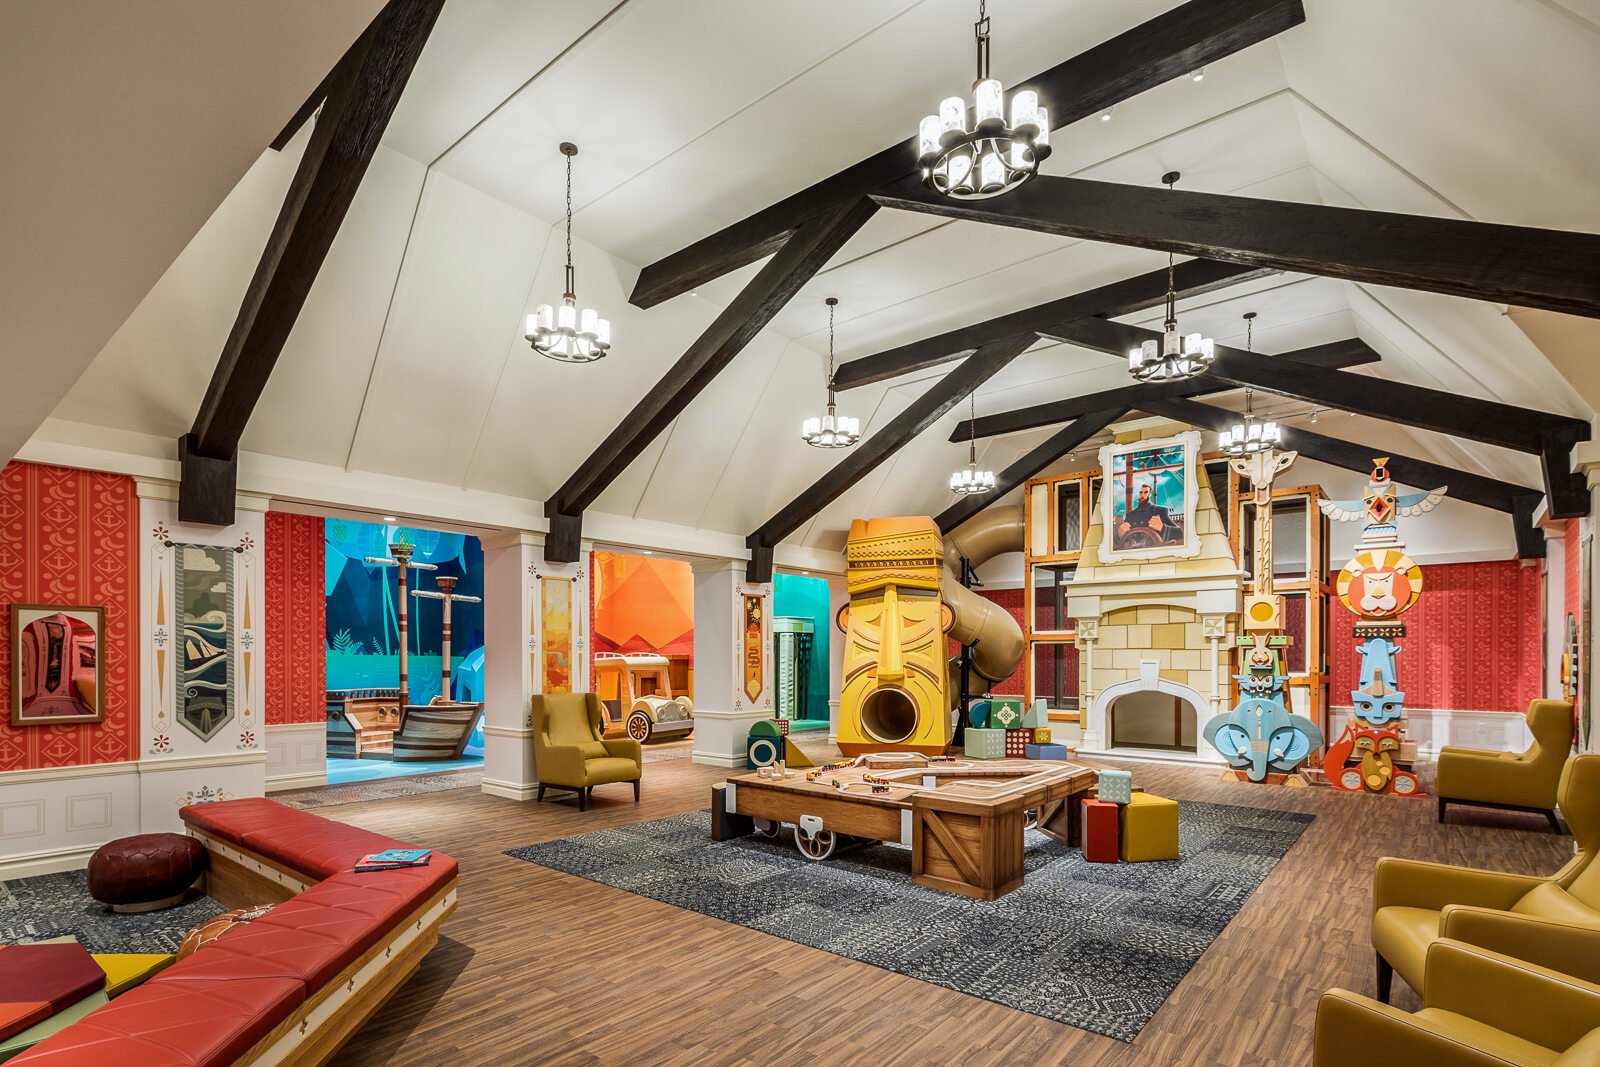 A vibrant and whimsically designed playroom with playful architecture, colorful walls, an assortment of cozy seating arrangements, and an oversized, novelty light fixture, exuding a fun and imaginative environment for children.